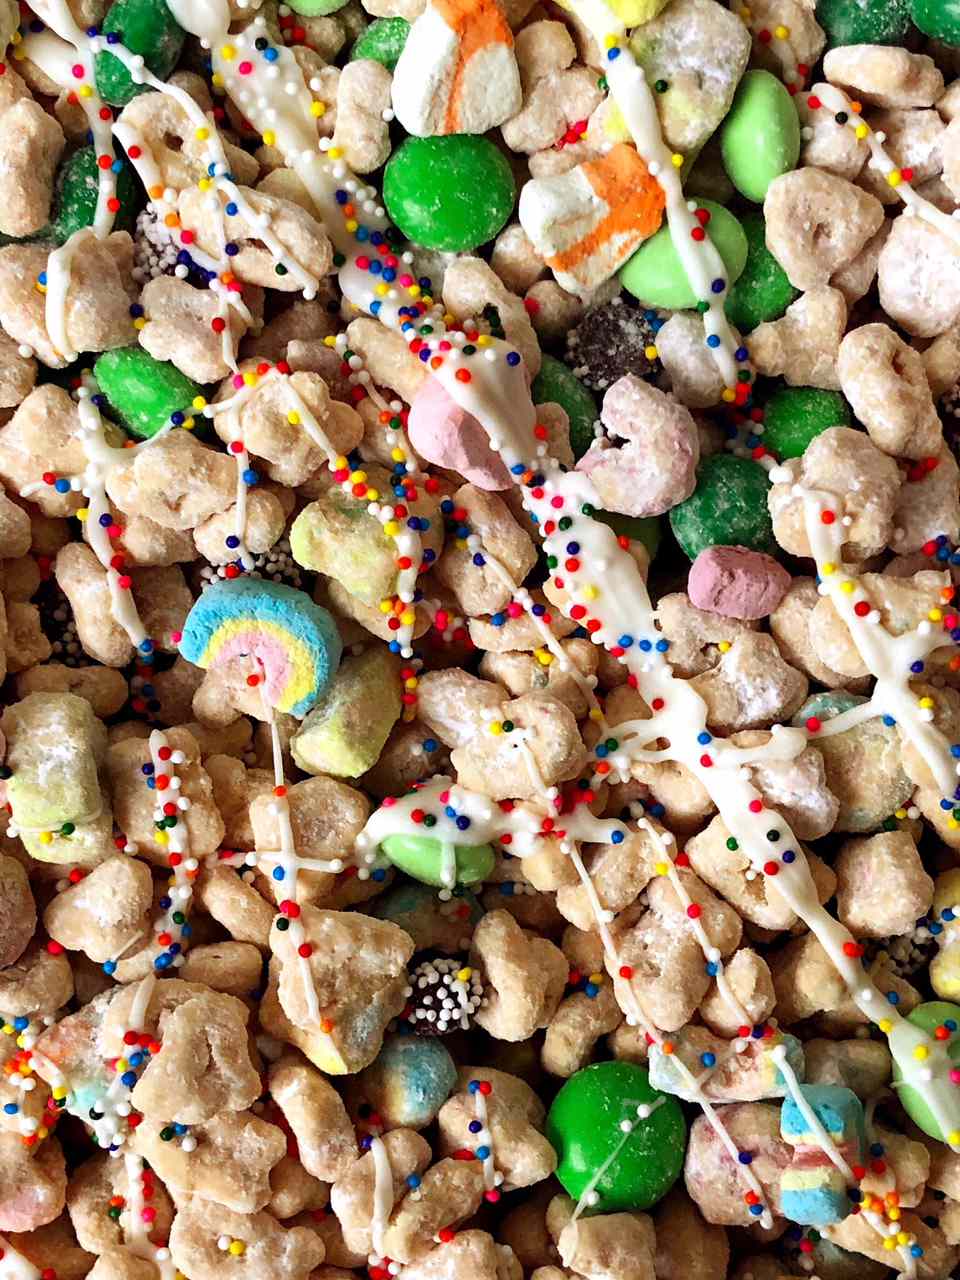 St Patrick's Day Snacks for Kids: Puppy Chow for St. Patrick's Day